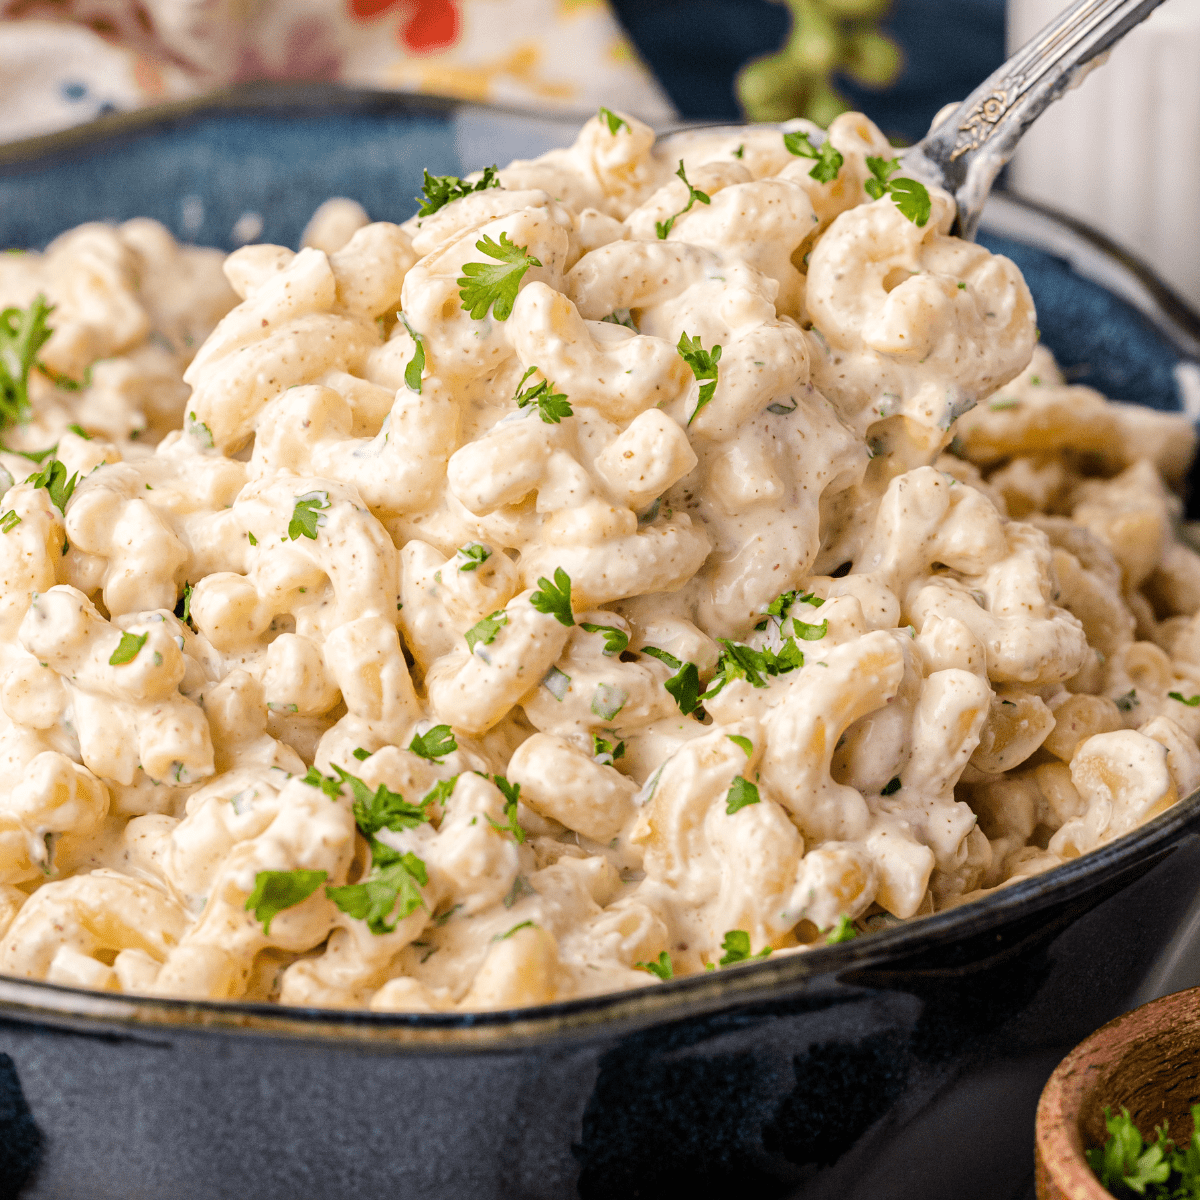 how to make creamy macaroni salad with deviled eggs